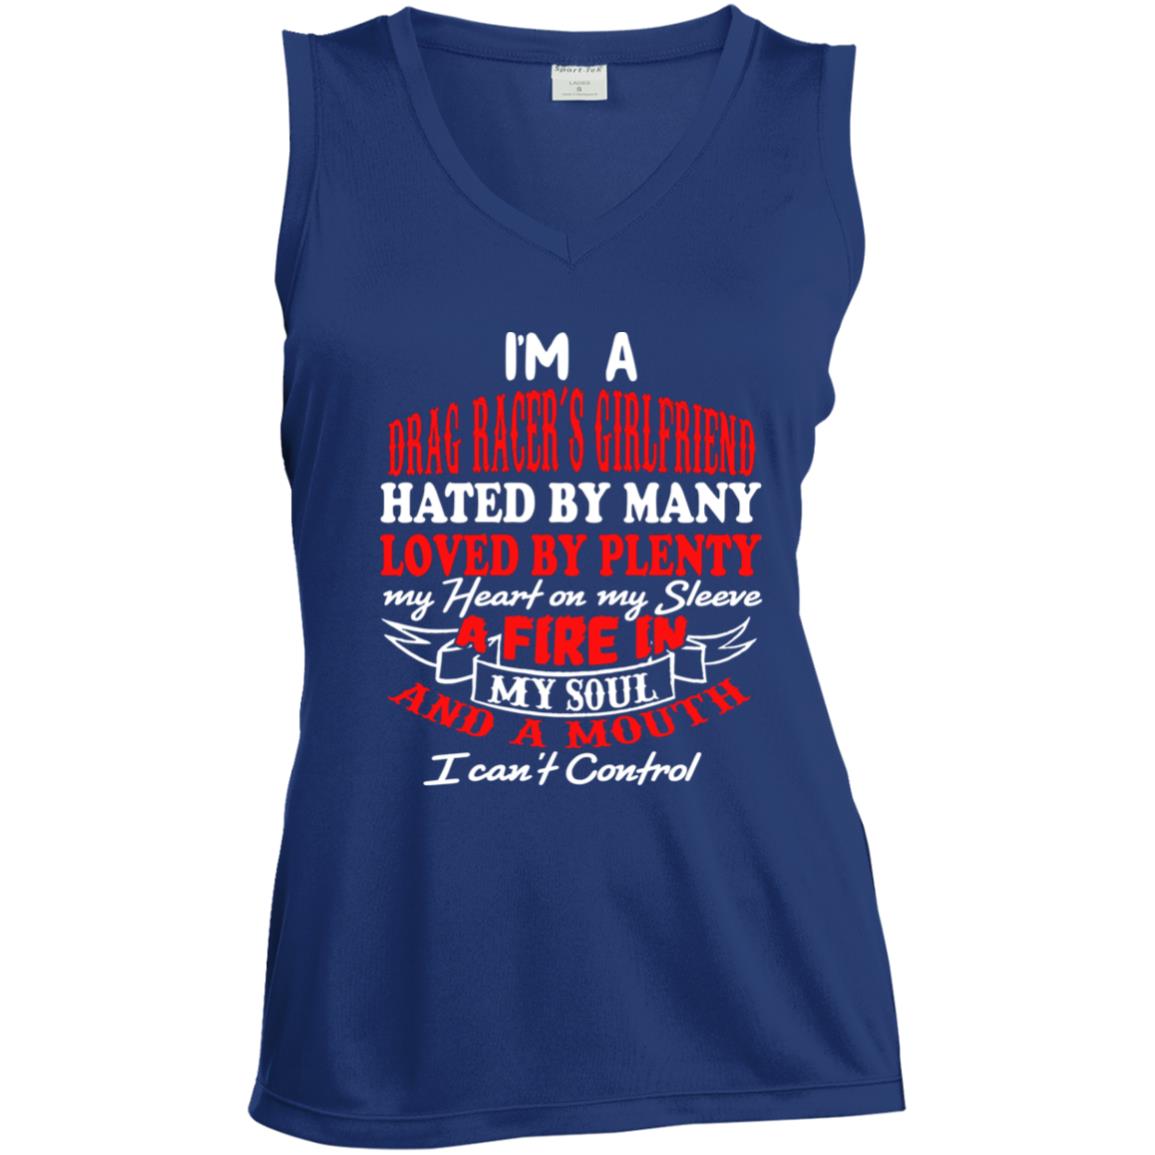 I'm A Drag Racer's Girlfriend Hated By Many Loved By Plenty Ladies' Sleeveless V-Neck Performance Tee